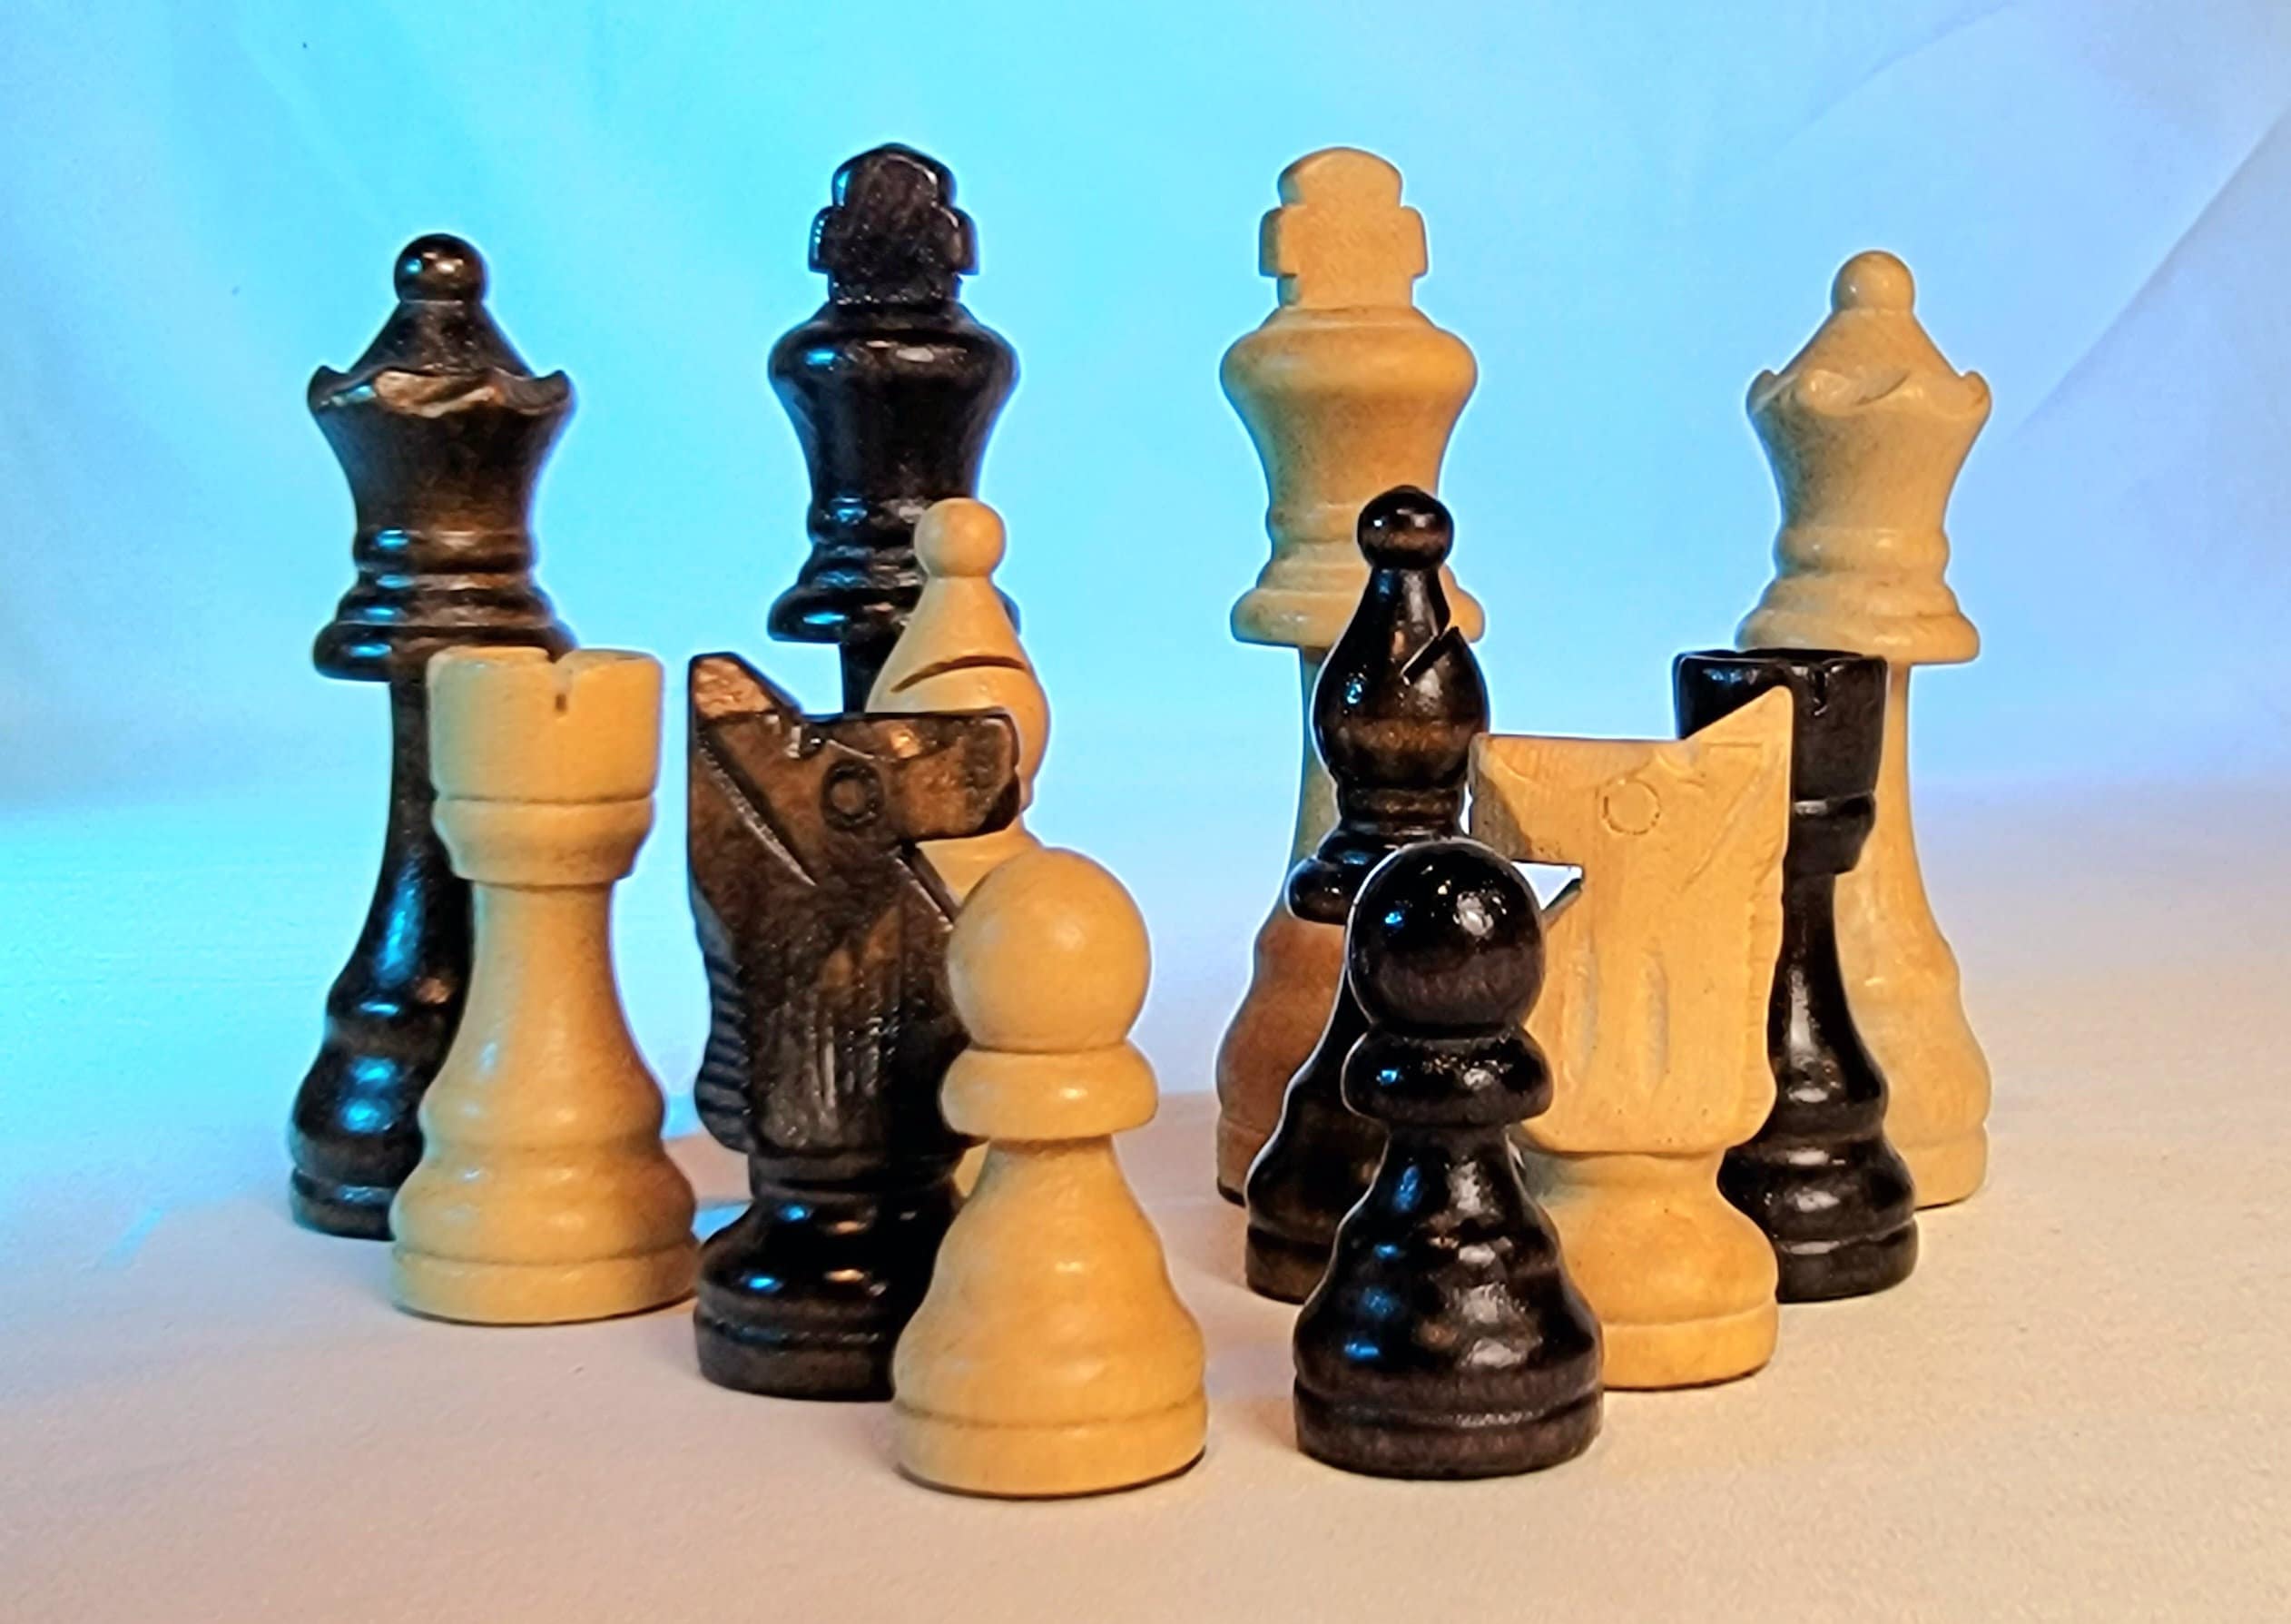  Staunton No. 6 Tournament Chess Pieces - Wooden standard  chessmen - Weighted, felted - Standard size… : Toys & Games